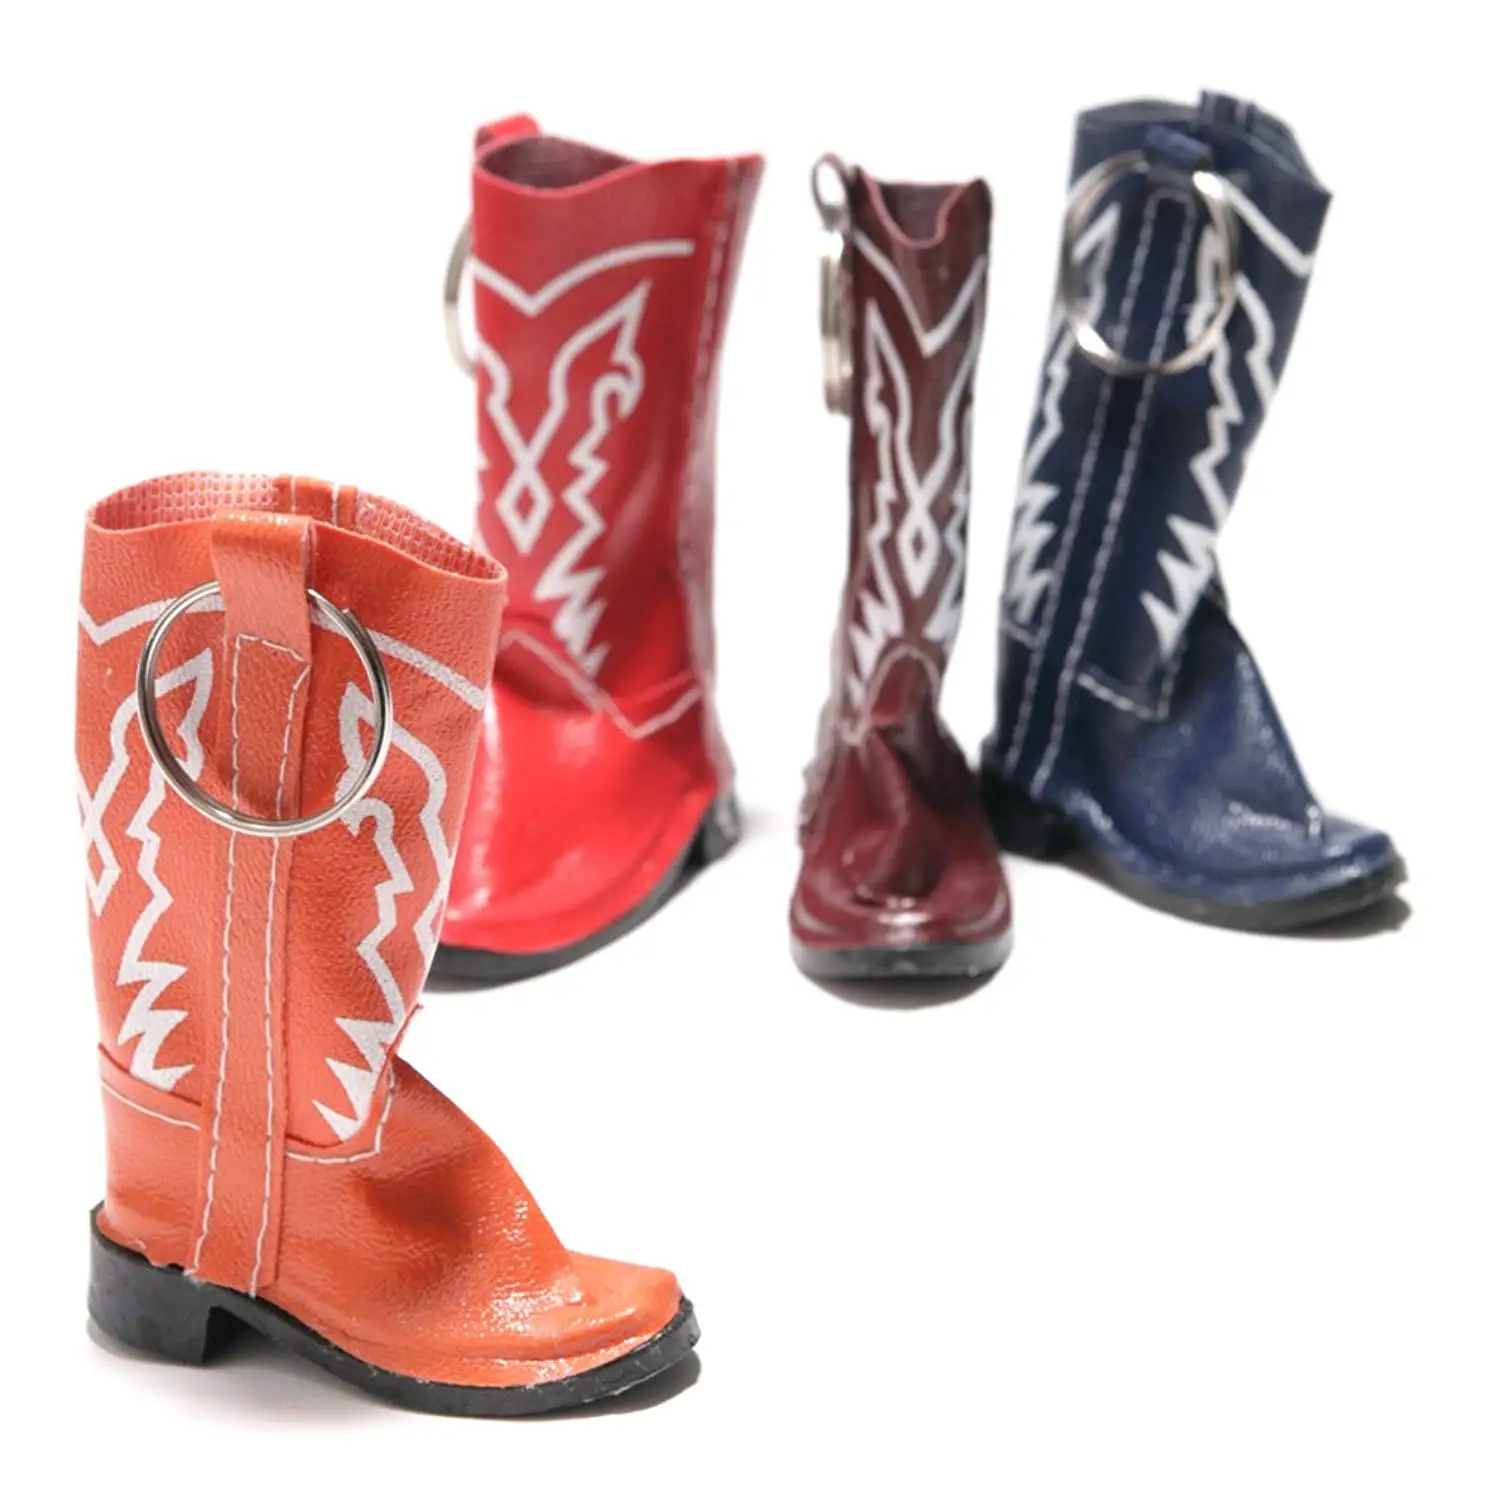 rubber overshoes for cowboy boots